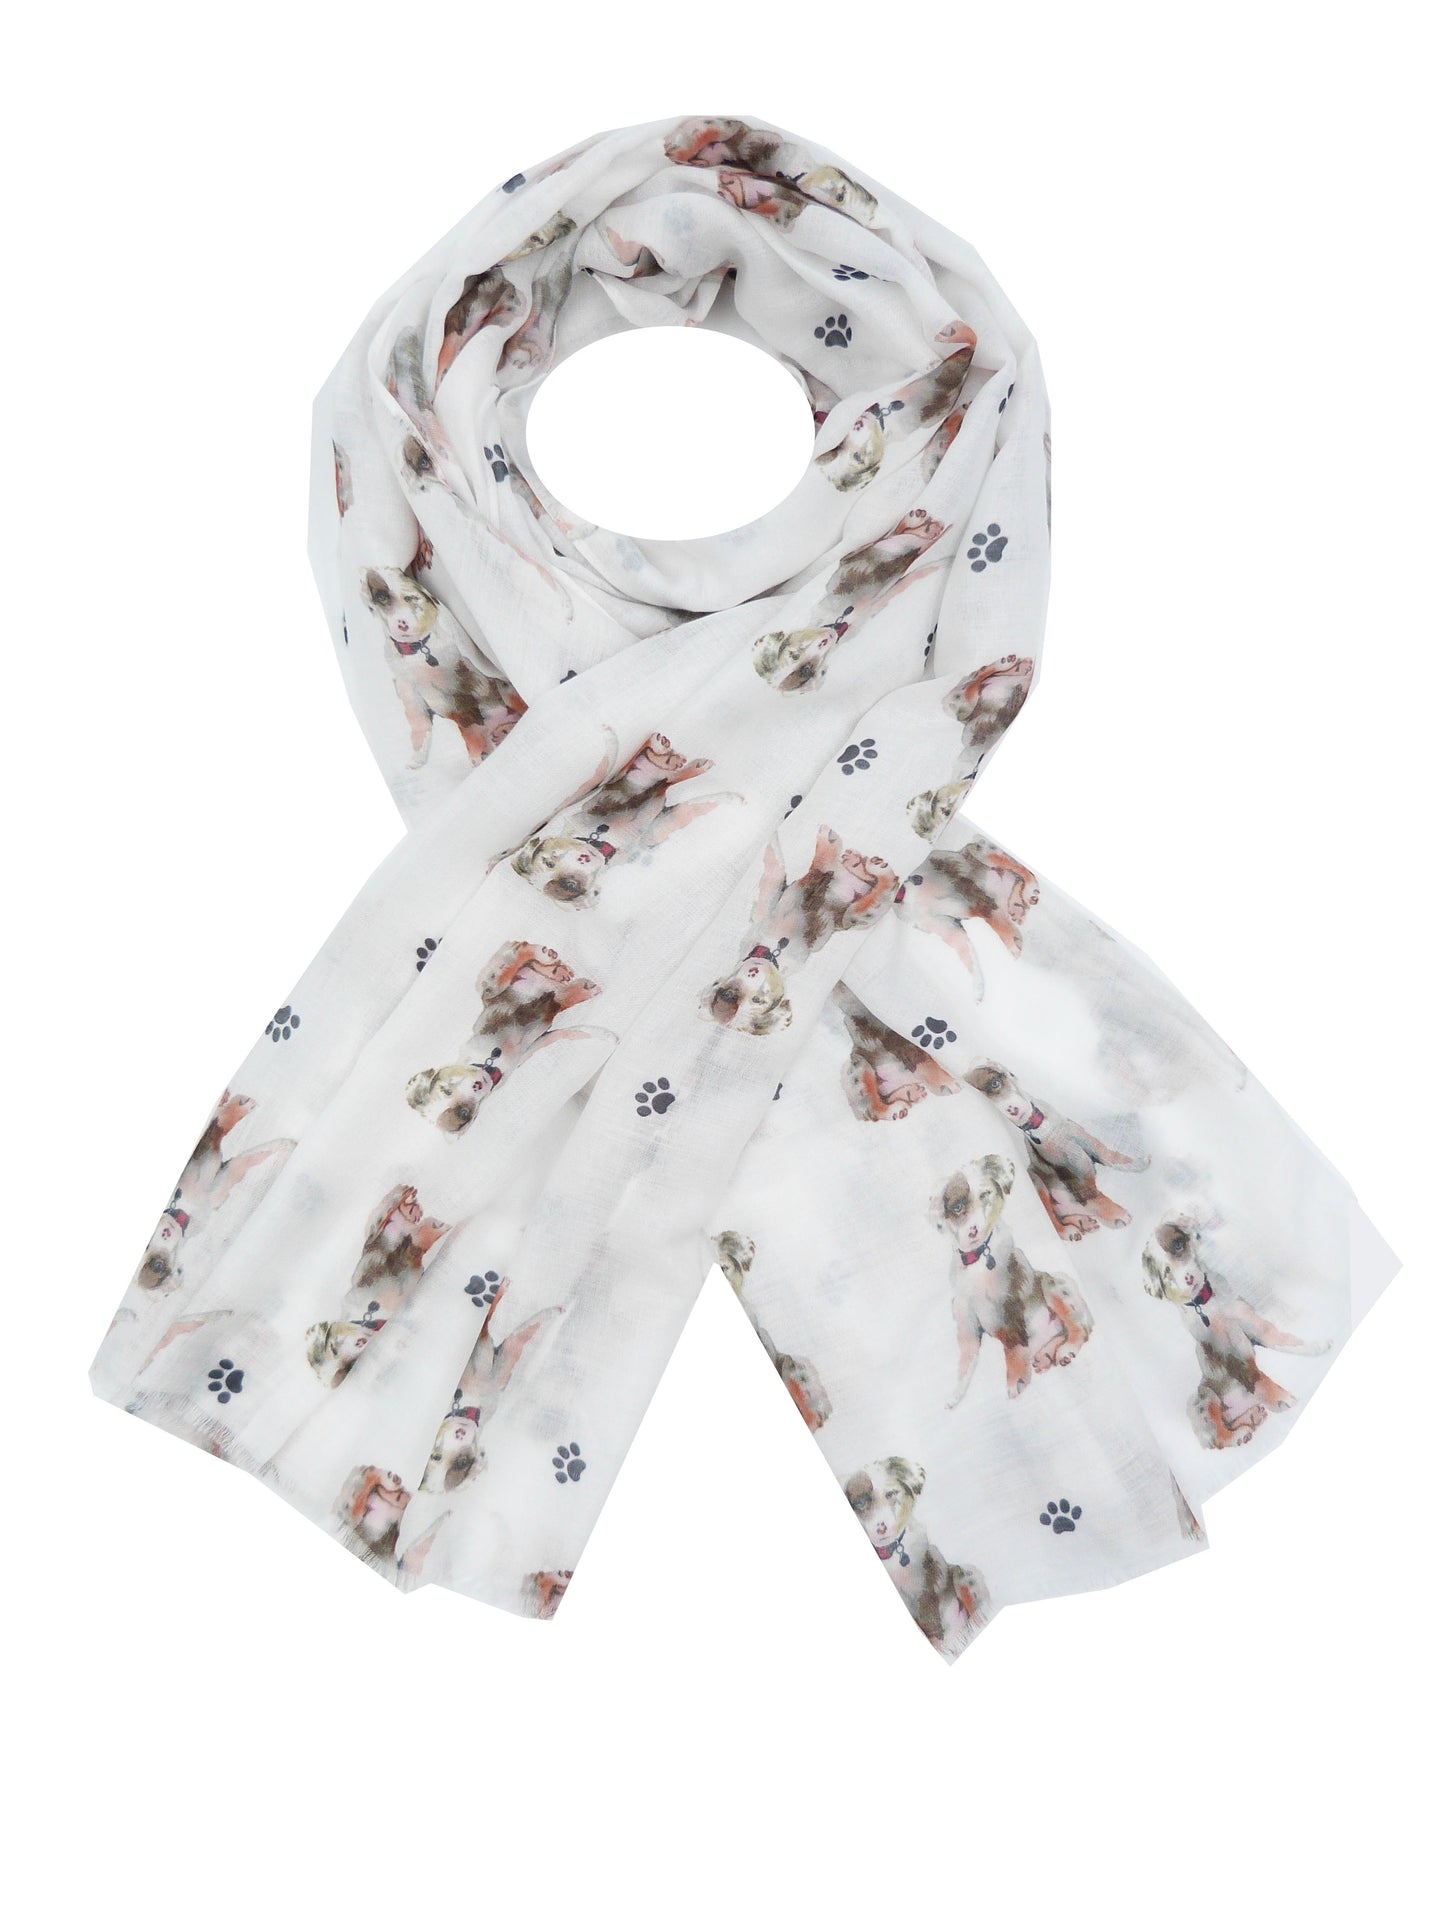 Sheep Dog Print Scarf Come With Free Gift Box